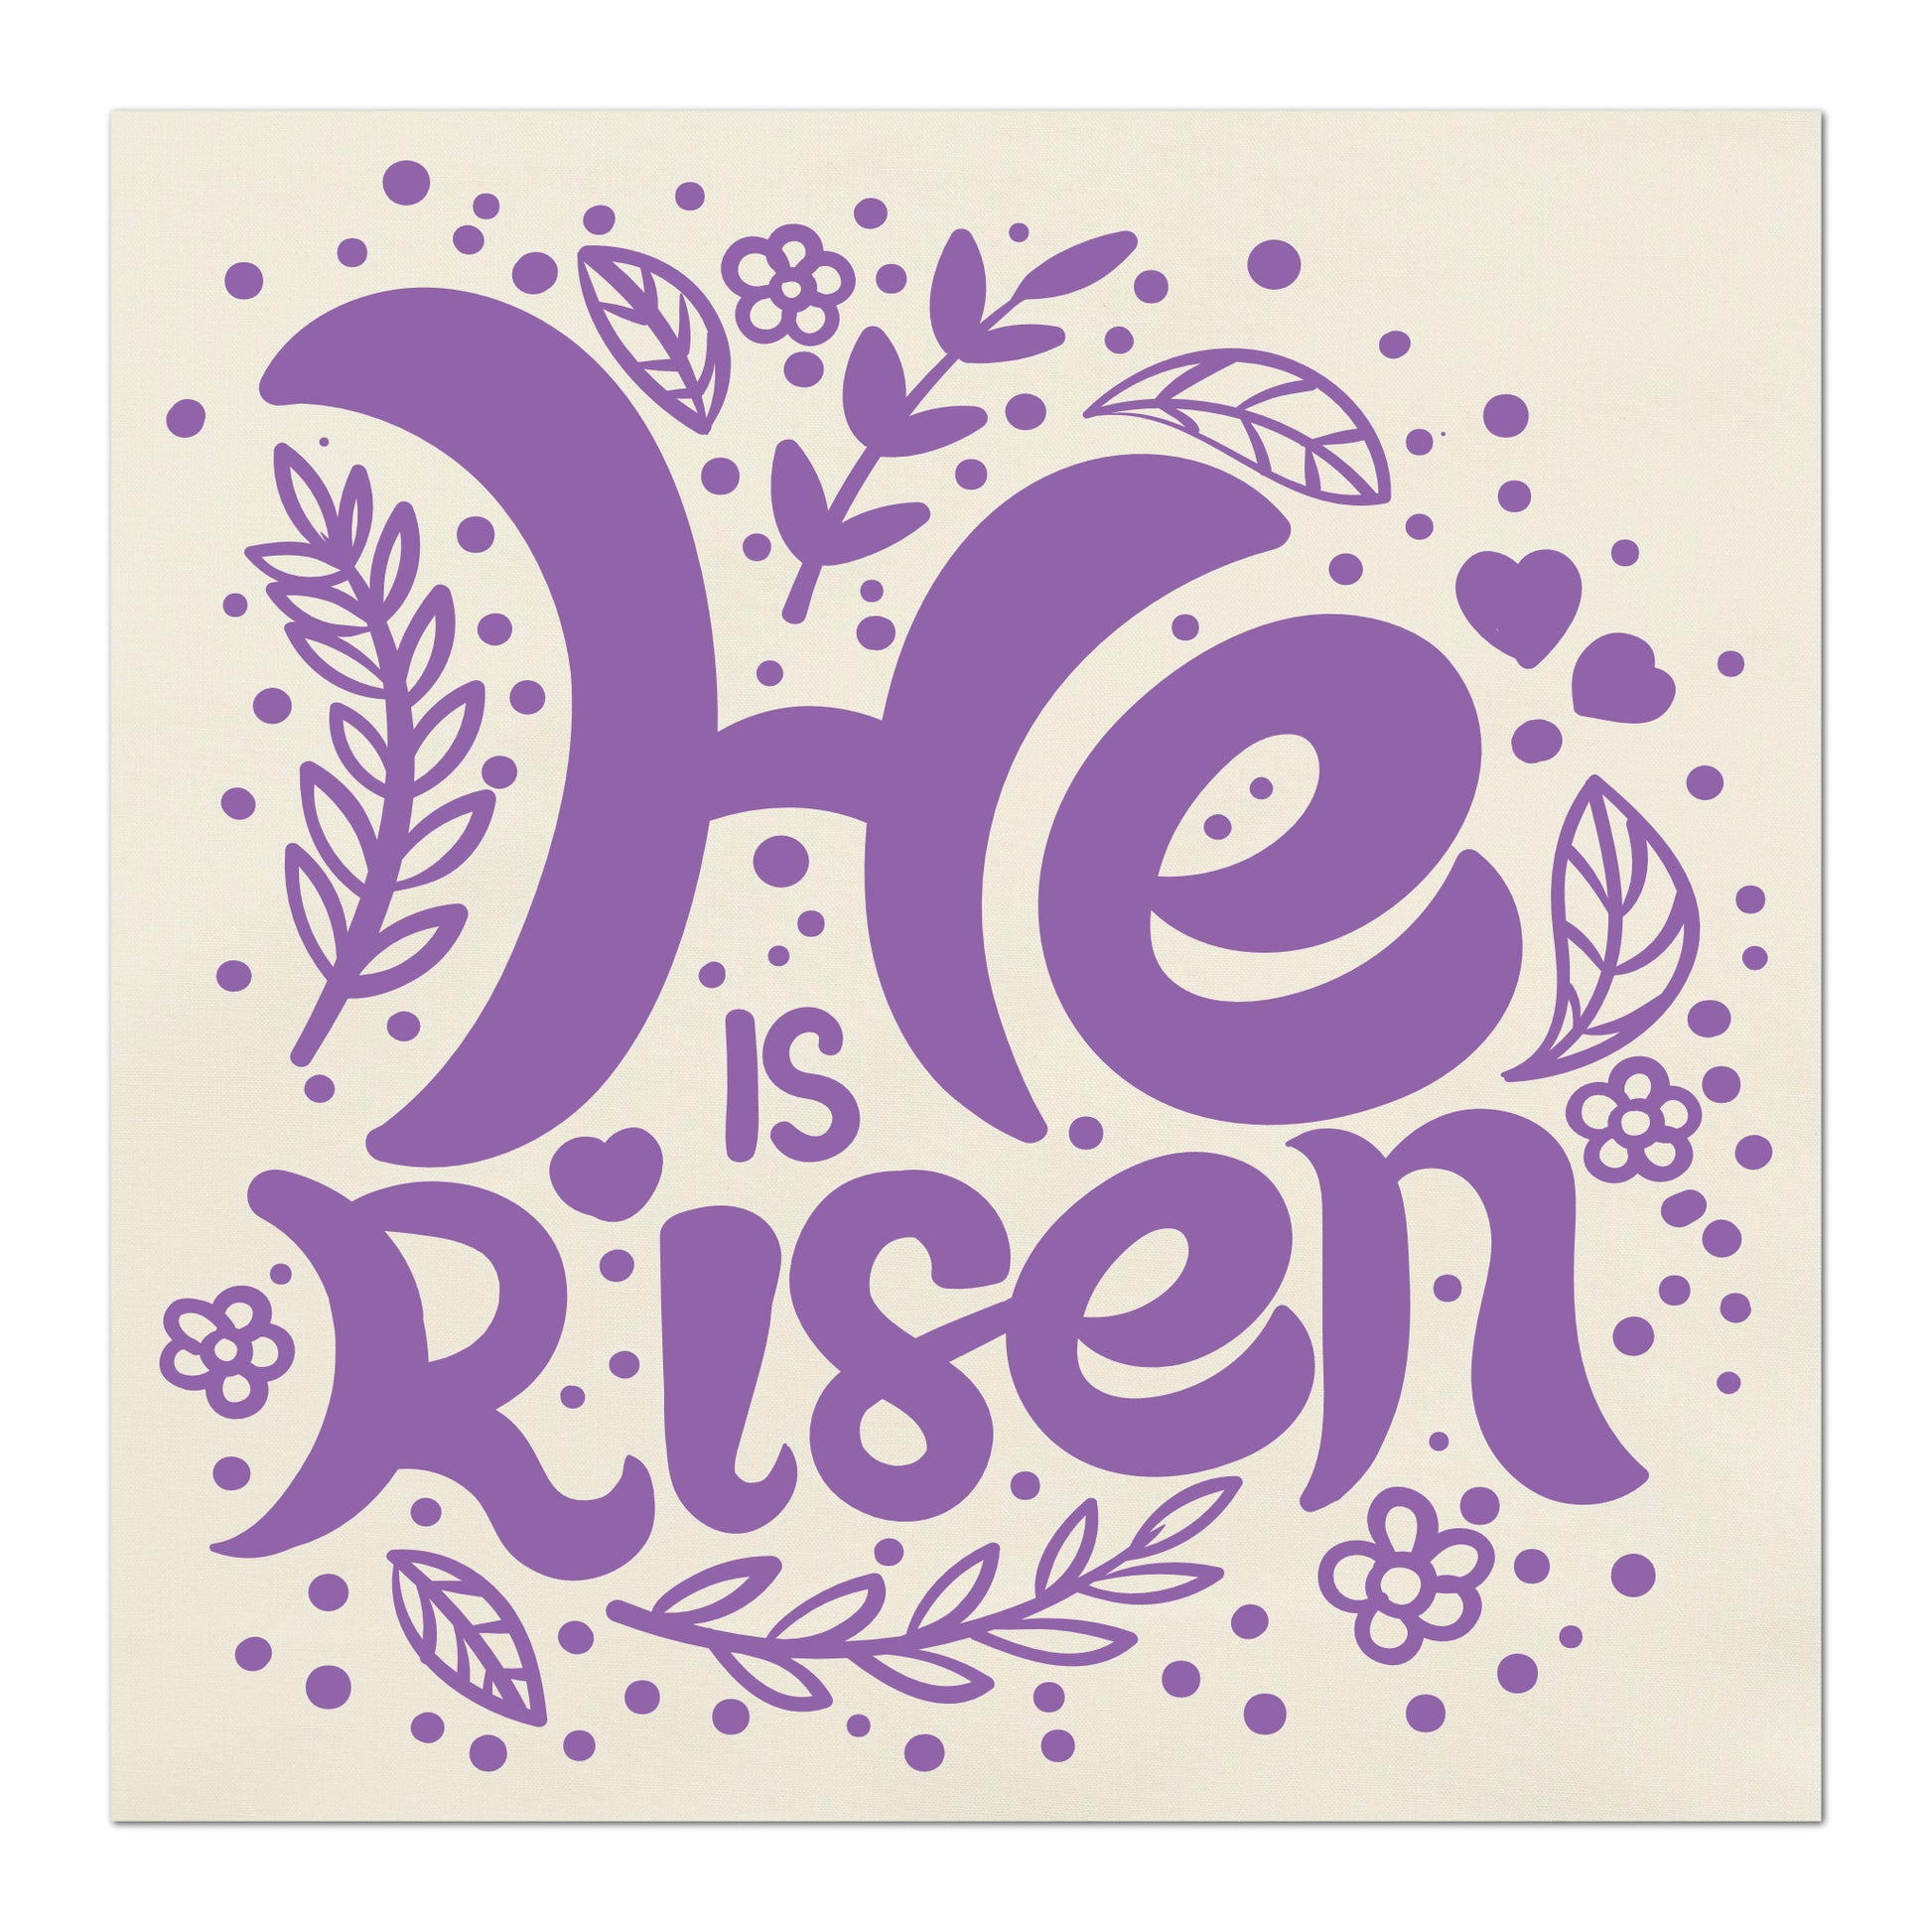 He is Risen, Christian Fabric, Religious, Quilt, Quilting Block, Sewing 